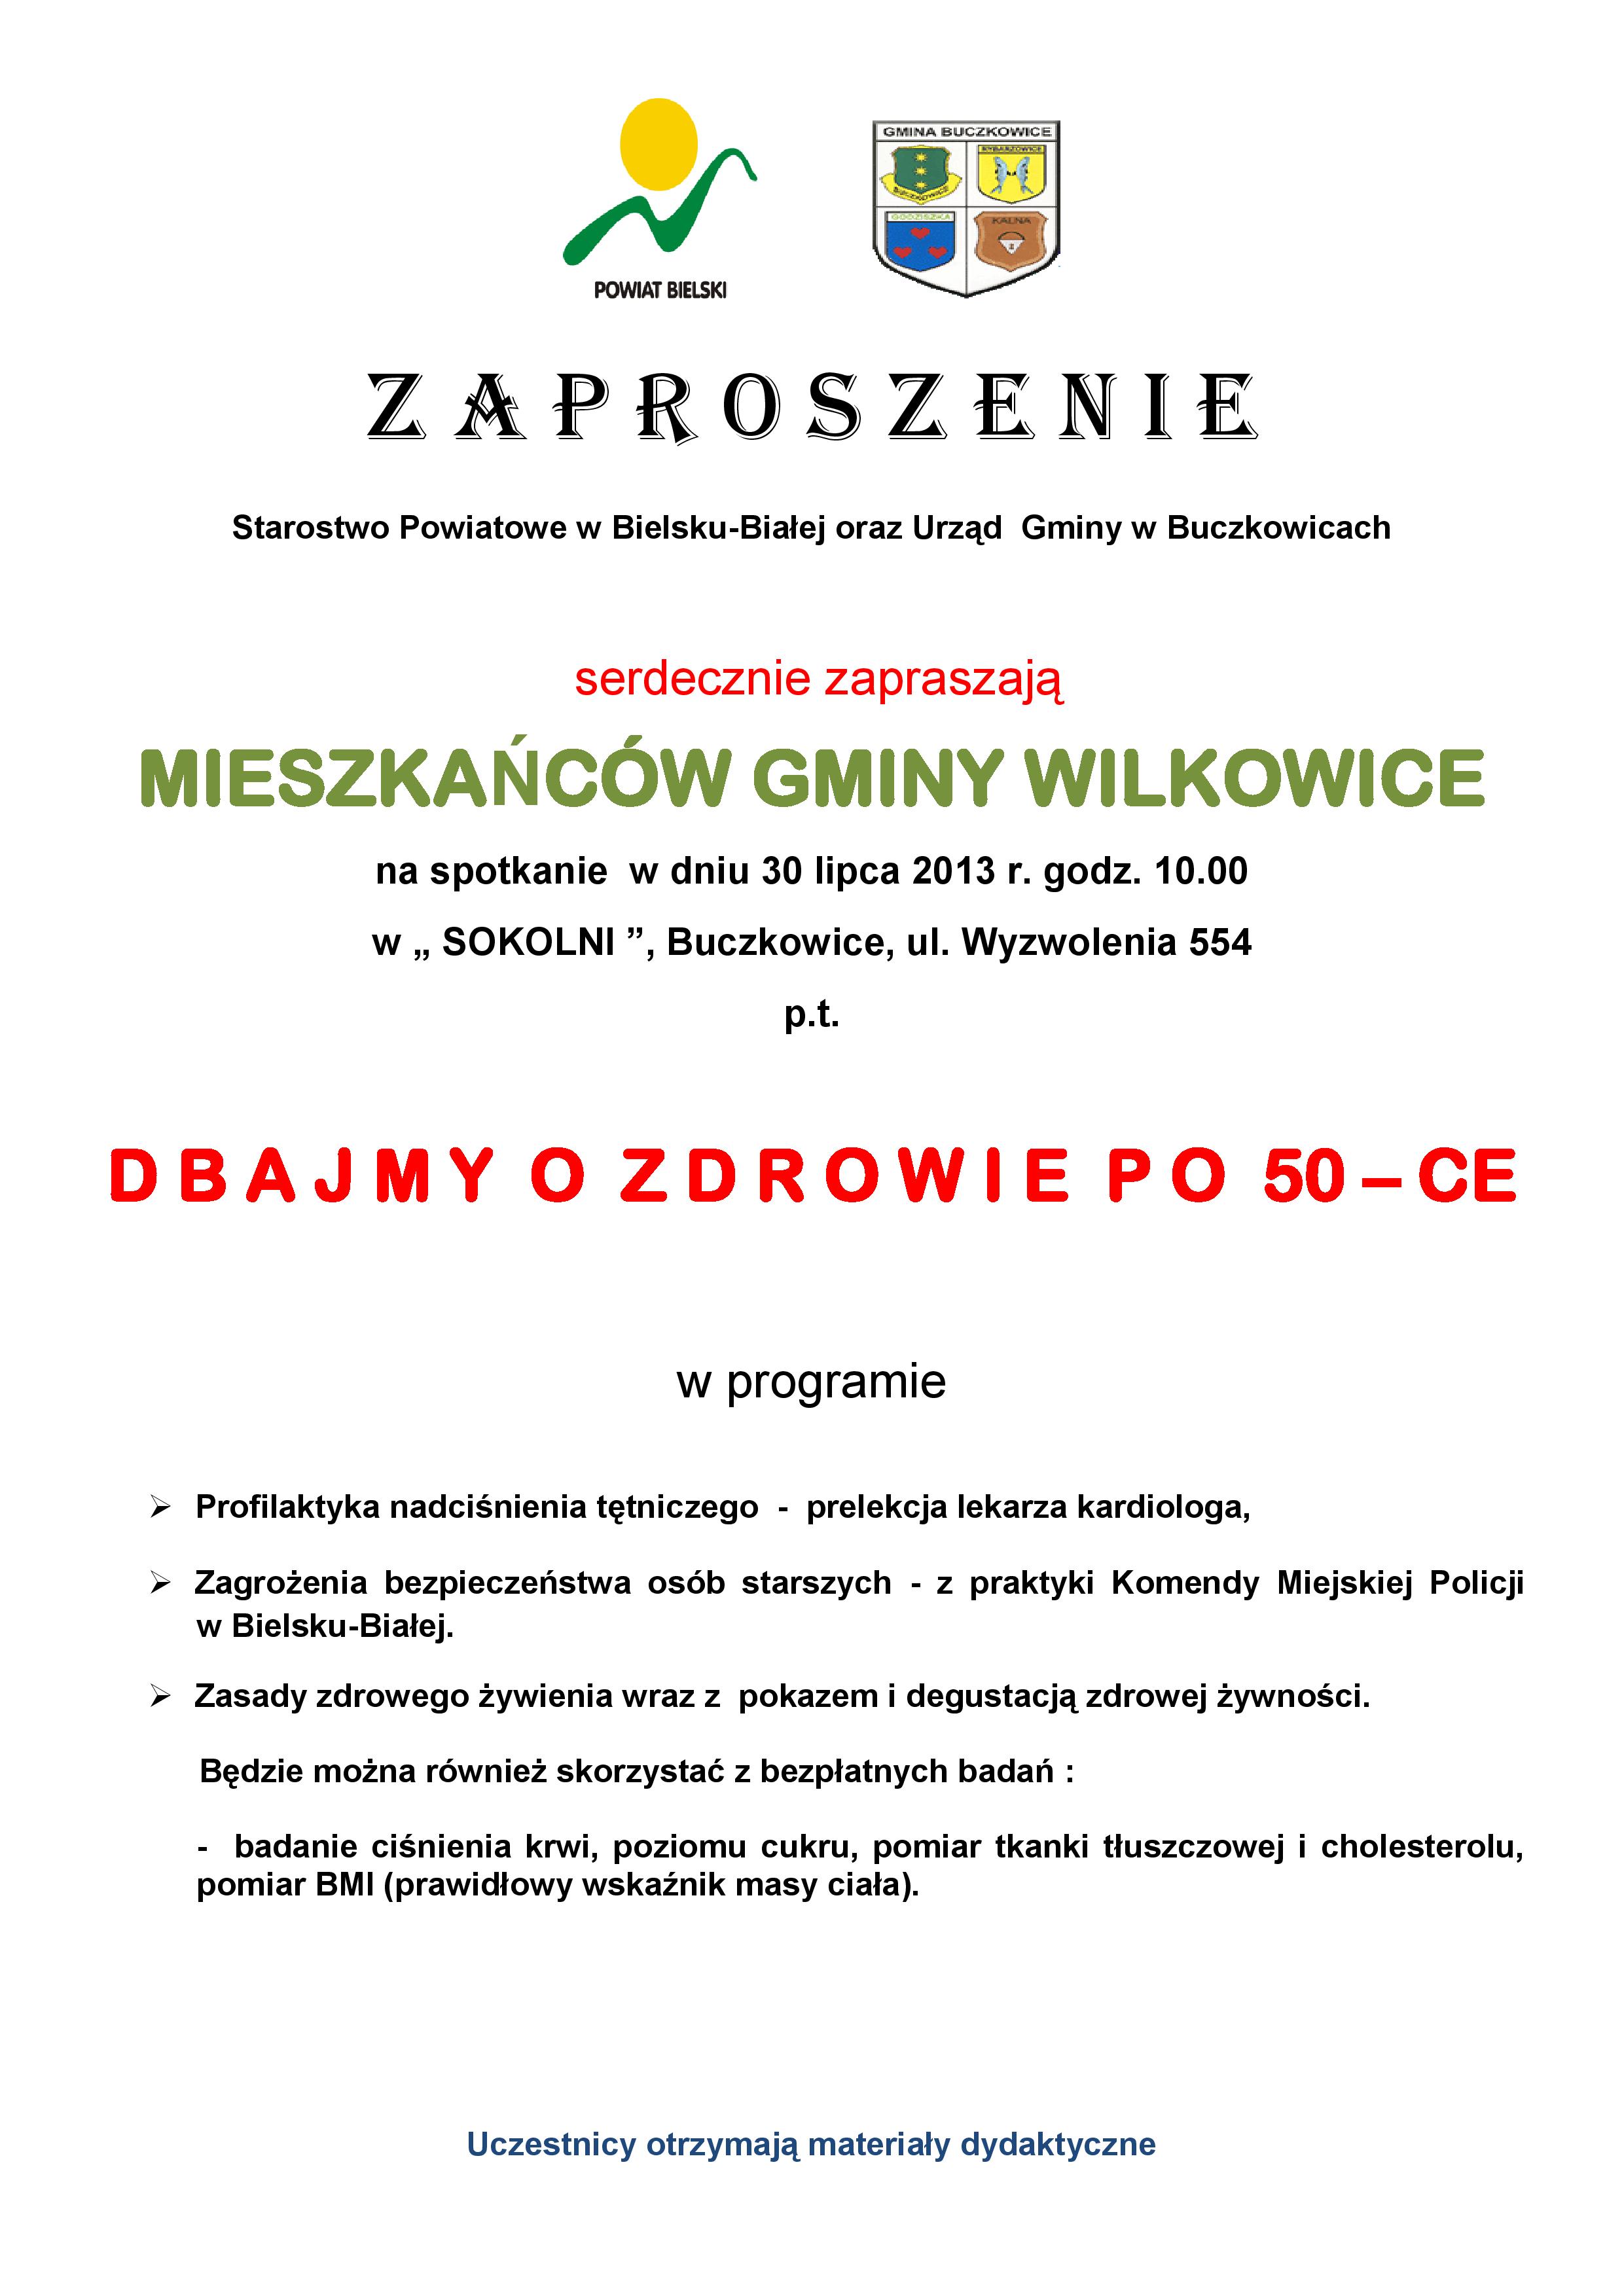 Plakat wilkowice page 001